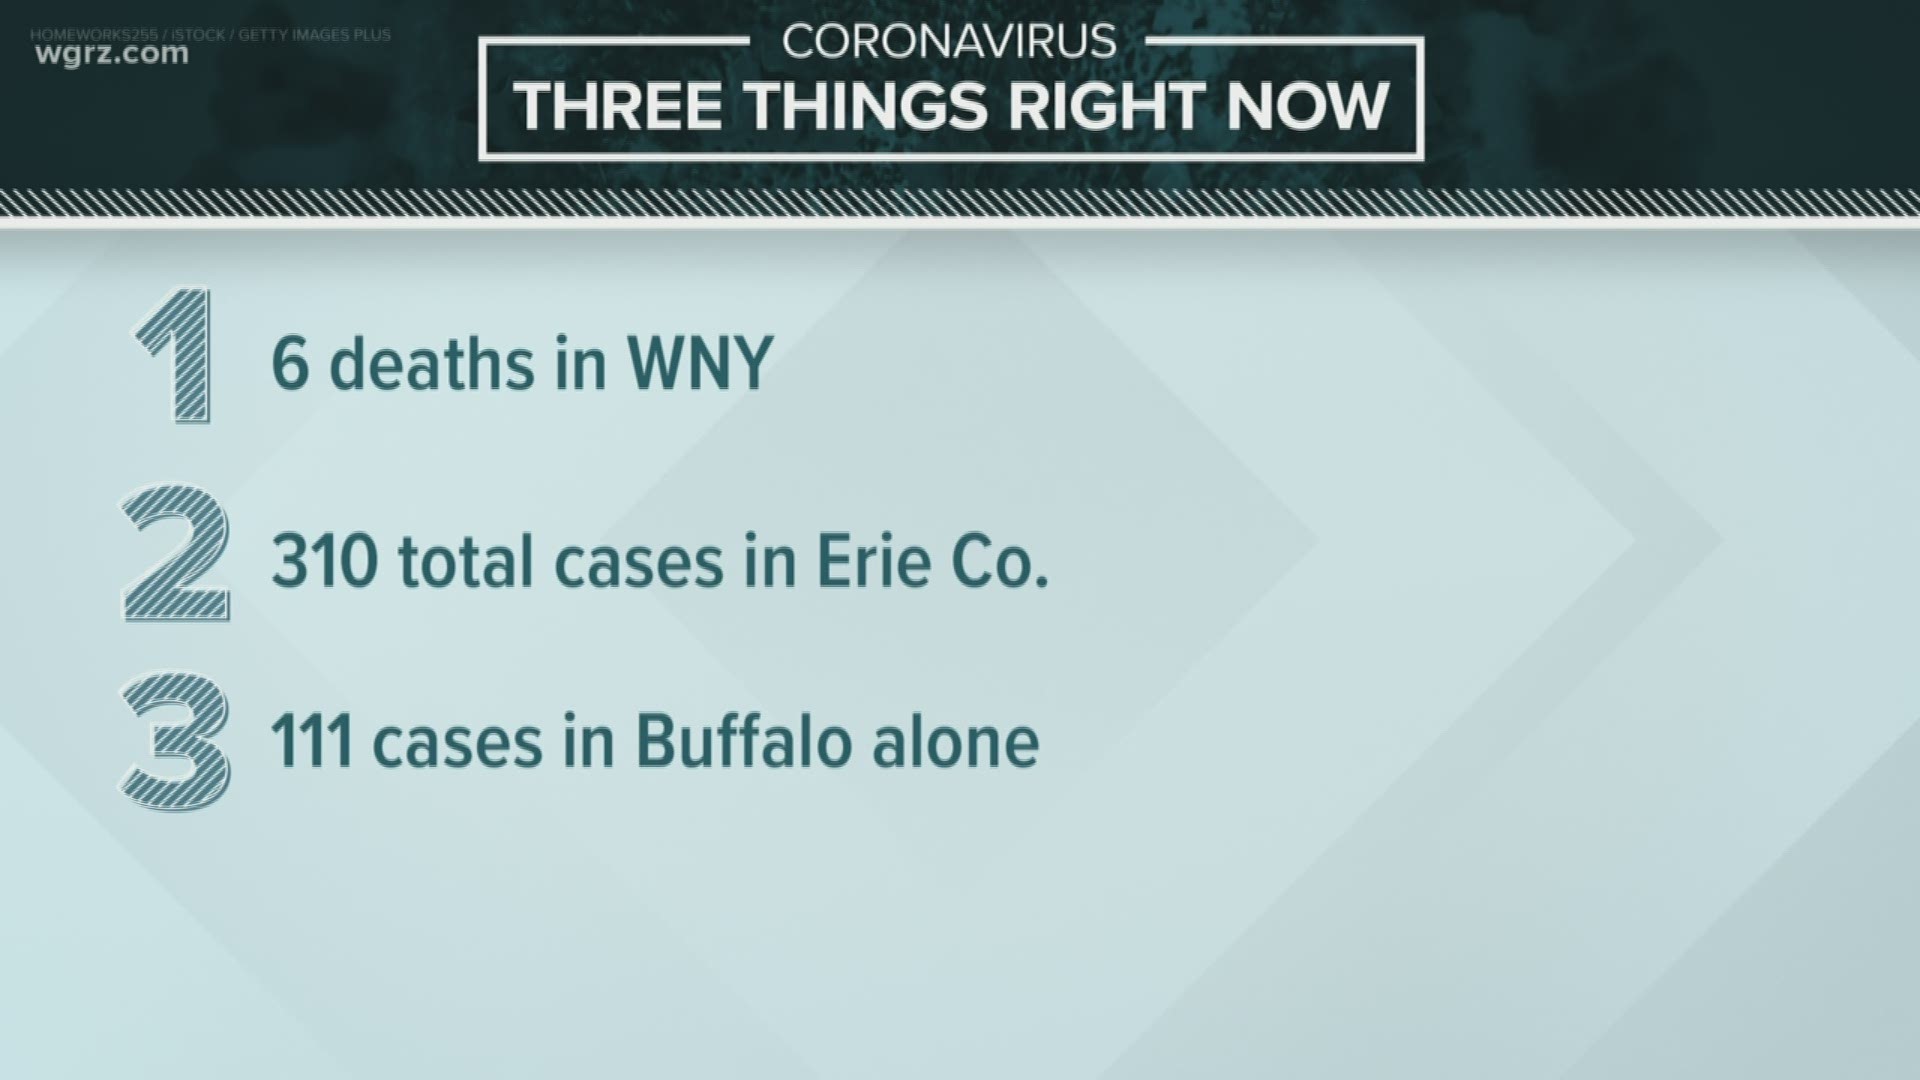 Western New York has seen its 6th corona virus-related death.It was confirmed just a short time ago. The Erie County cases just rose to 310 total cases.